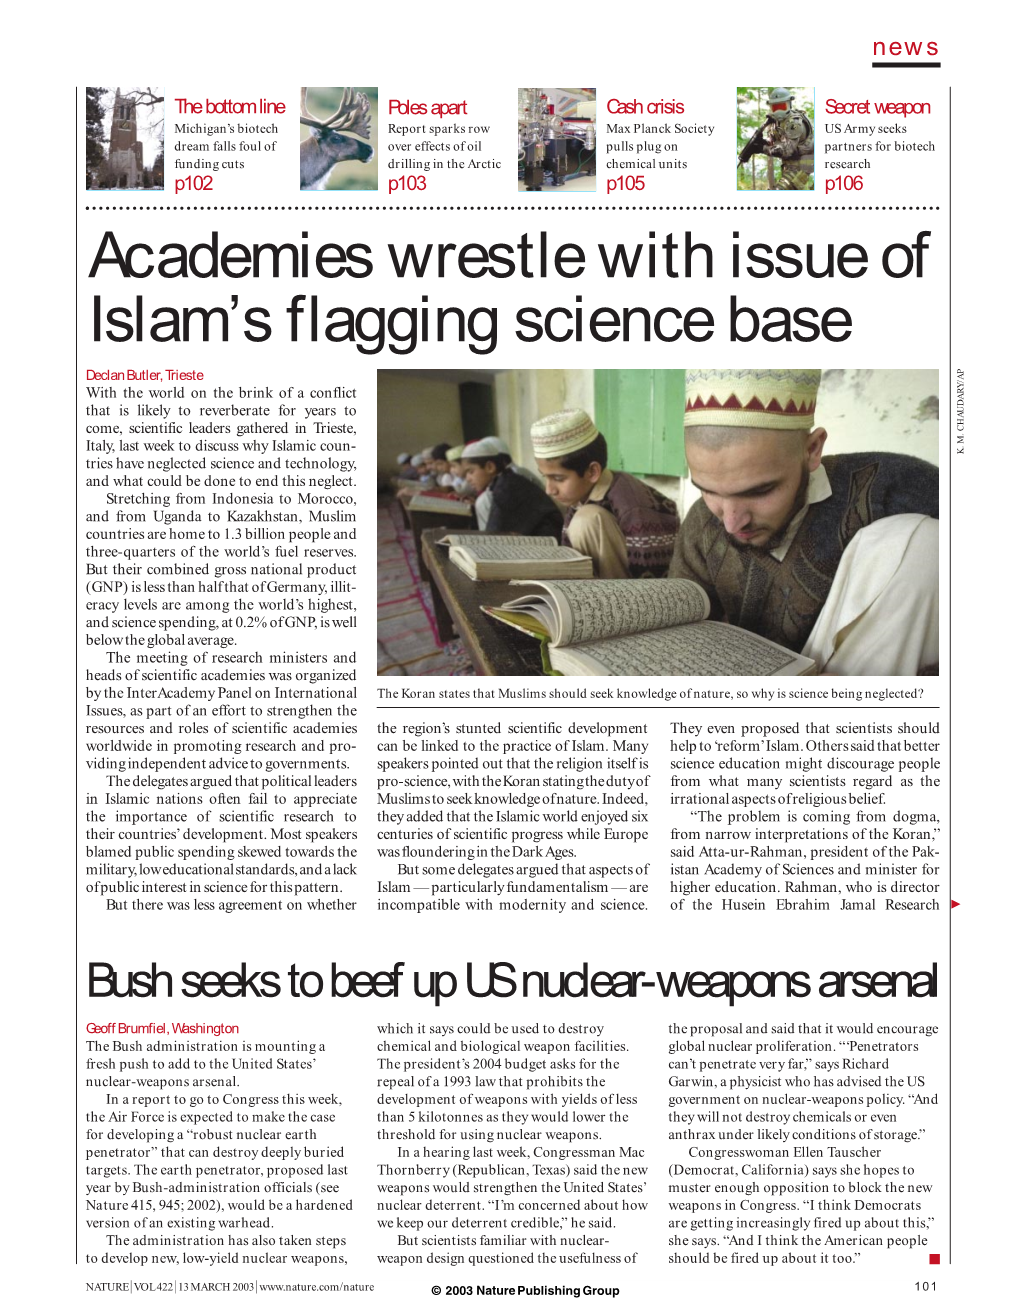 Academies Wrestle with Issue of Islam's Flagging Science Base